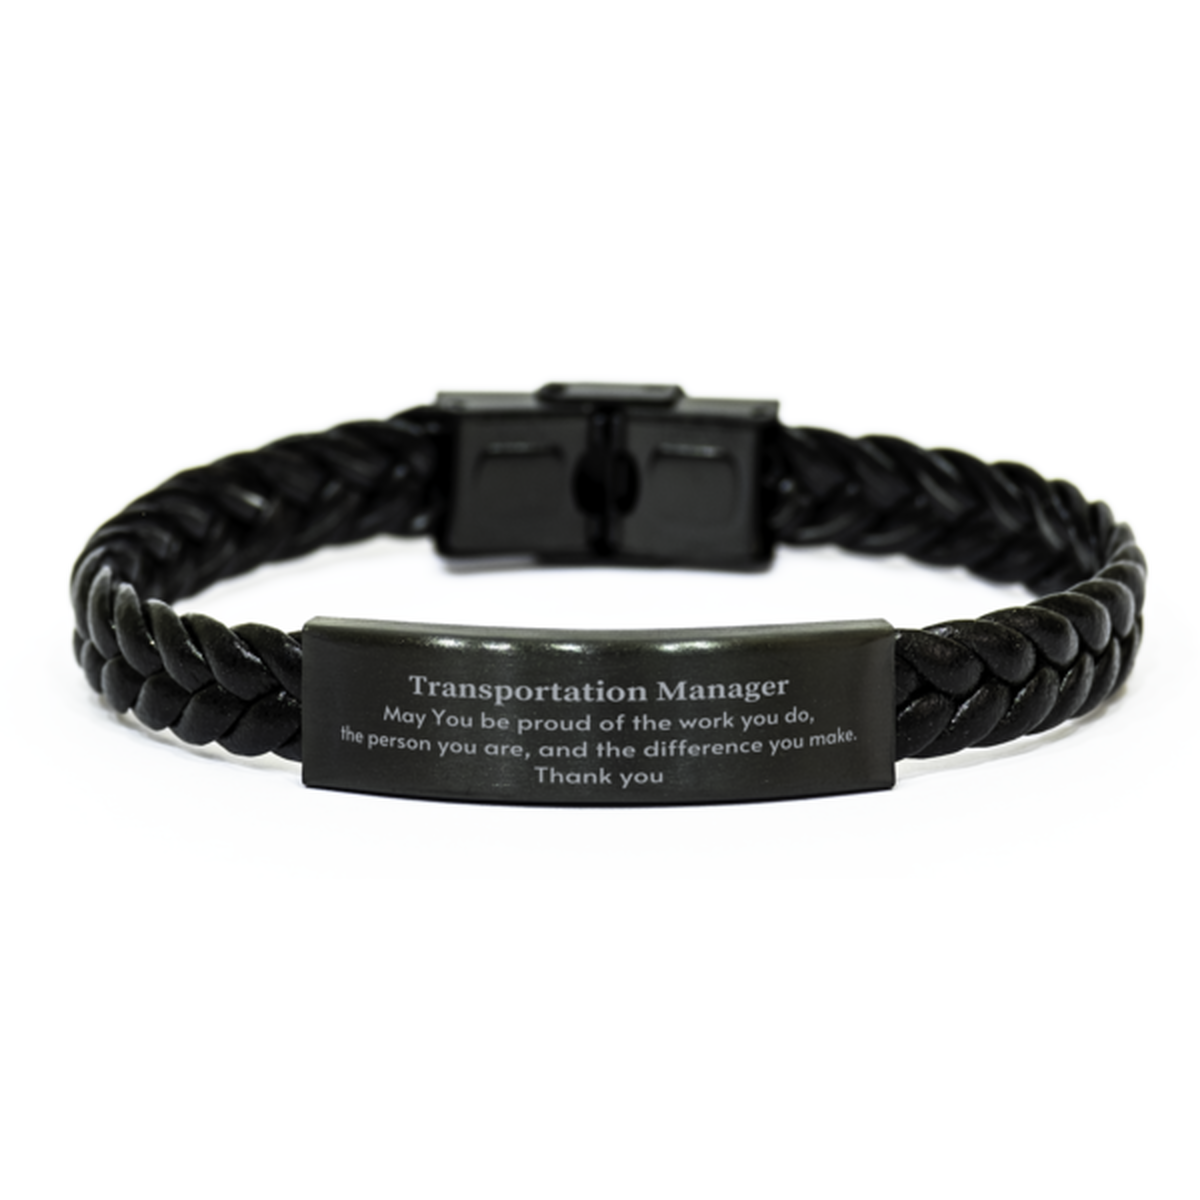 Heartwarming Braided Leather Bracelet Retirement Coworkers Gifts for Transportation Manager, Transportation Manager May You be proud of the work you do, the person you are Gifts for Boss Men Women Friends